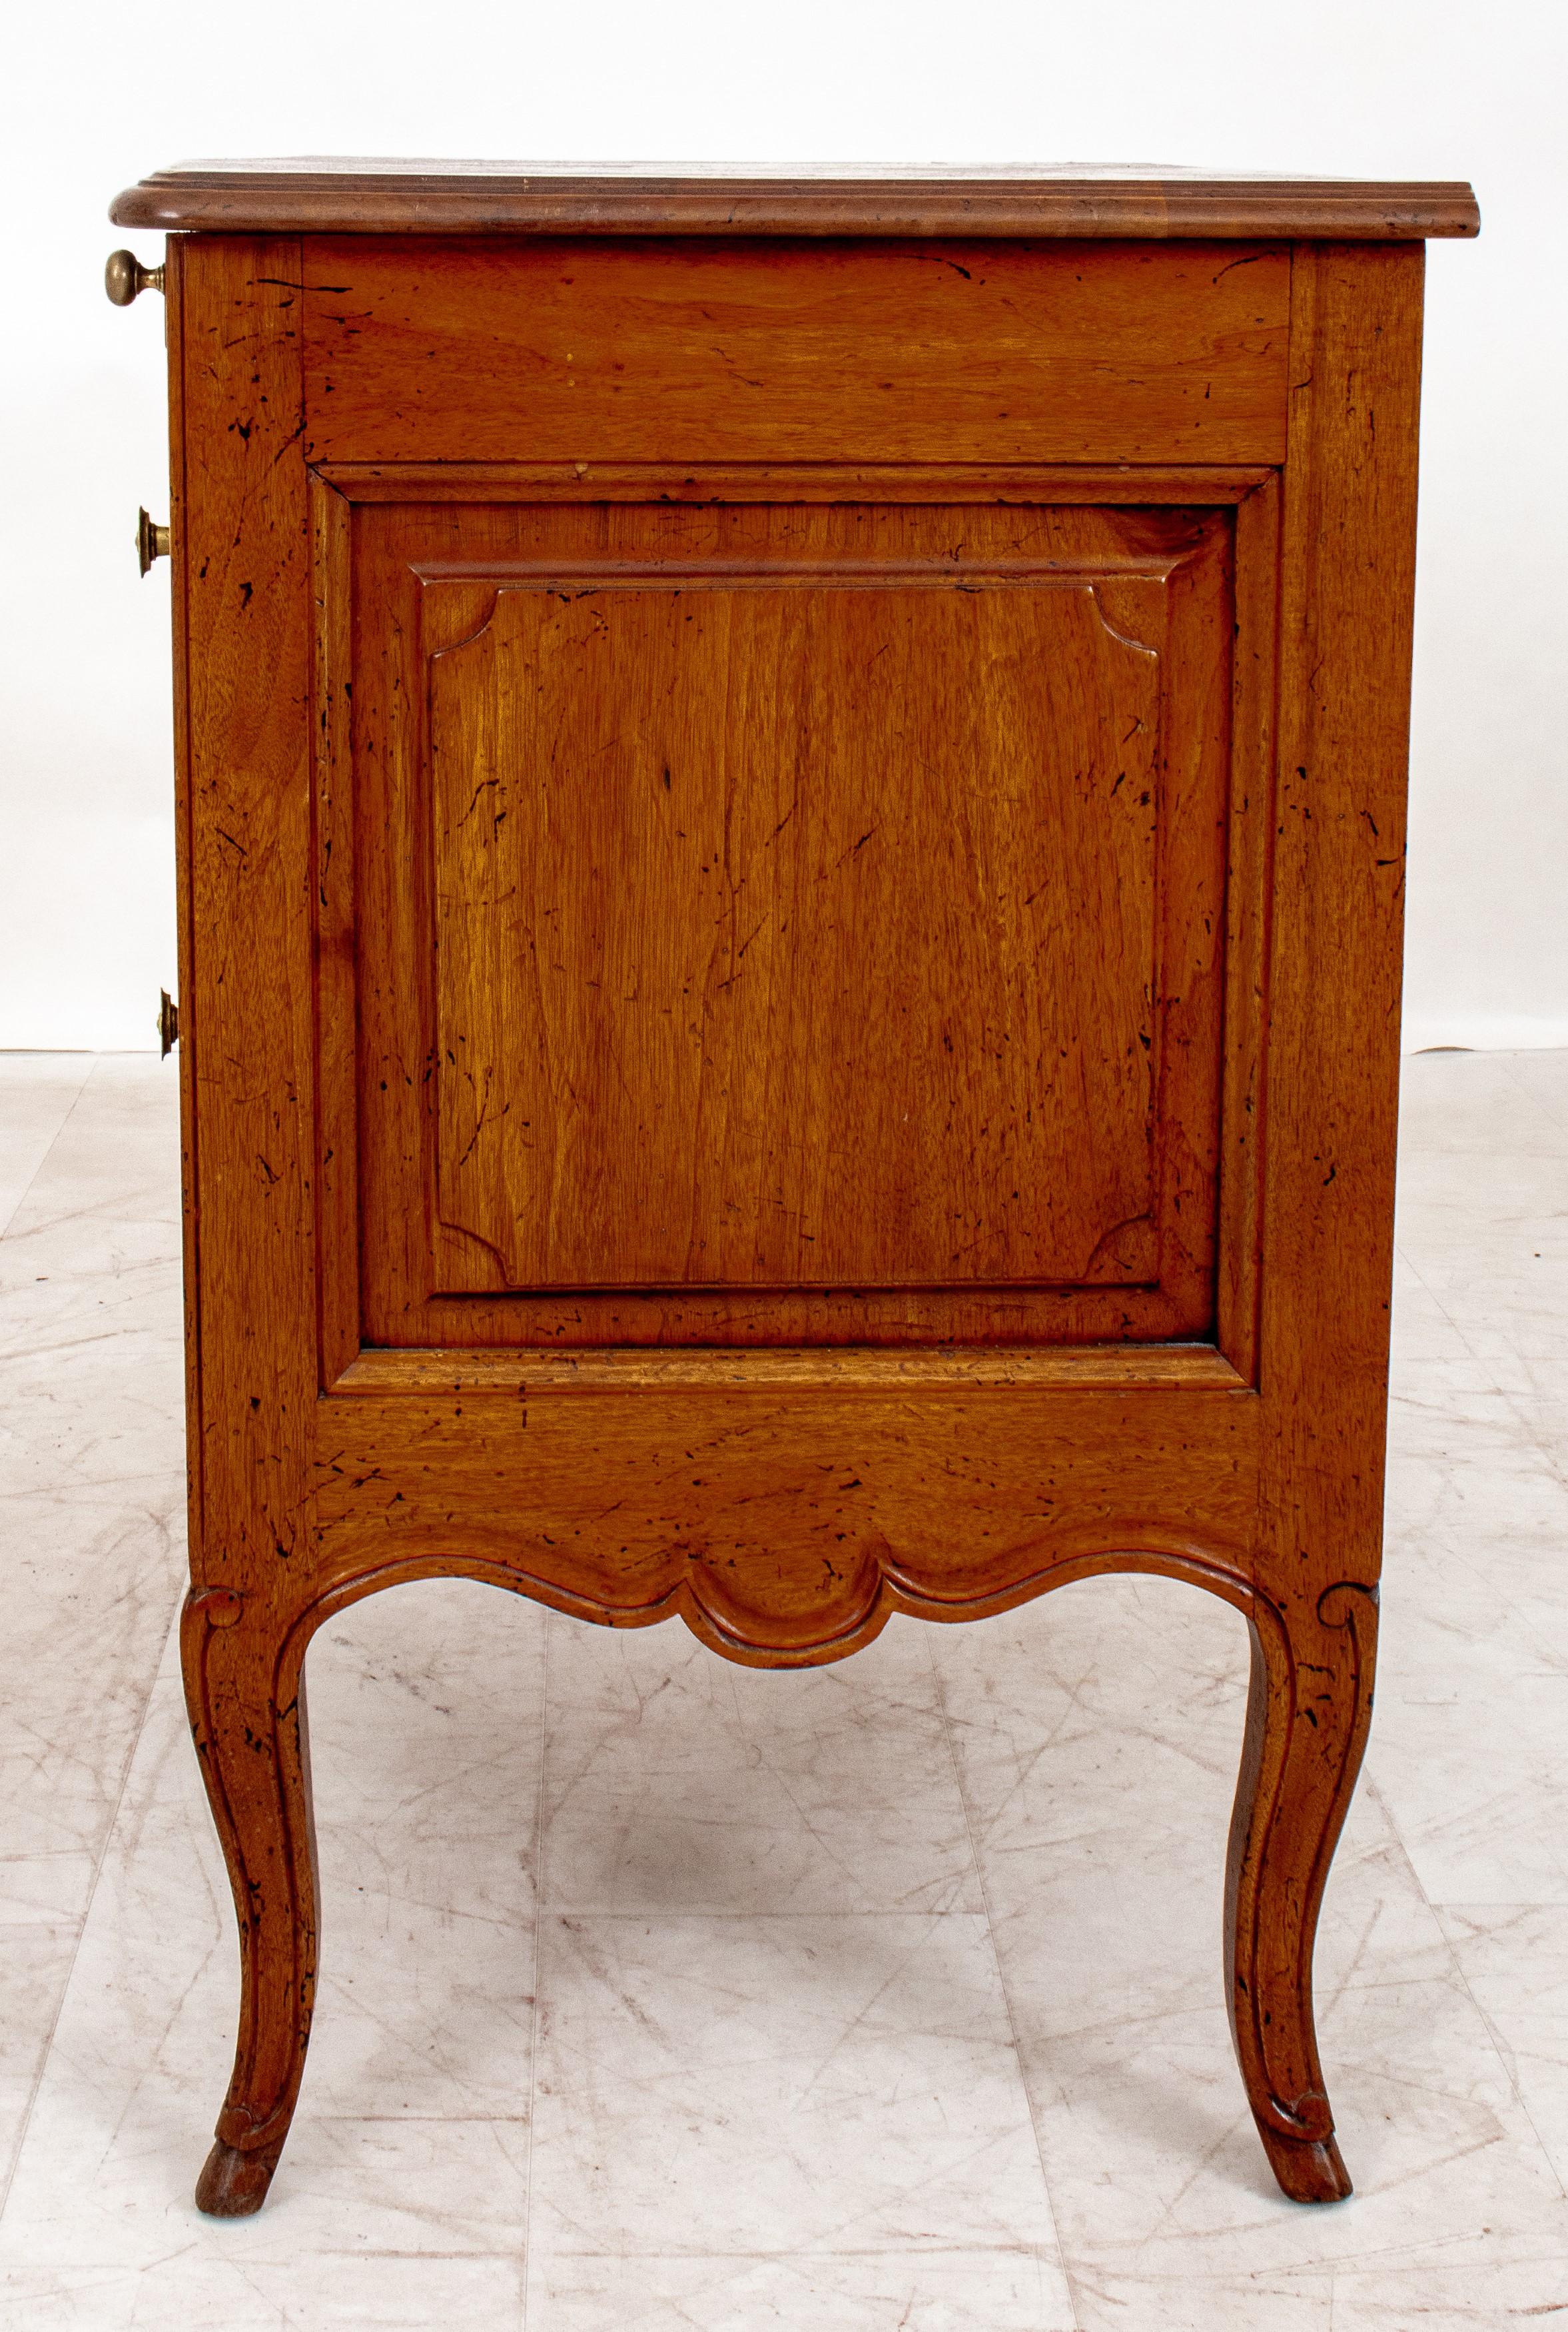  French Provincial Louis XV Style Walnut small commode. Here are the details:

Style: French Provincial Louis XV
Material: Walnut
Features:
Shaped rectangular top
Slide
Two short conforming paneled serpentine drawers
Scrolling cabriole feet
Drawer